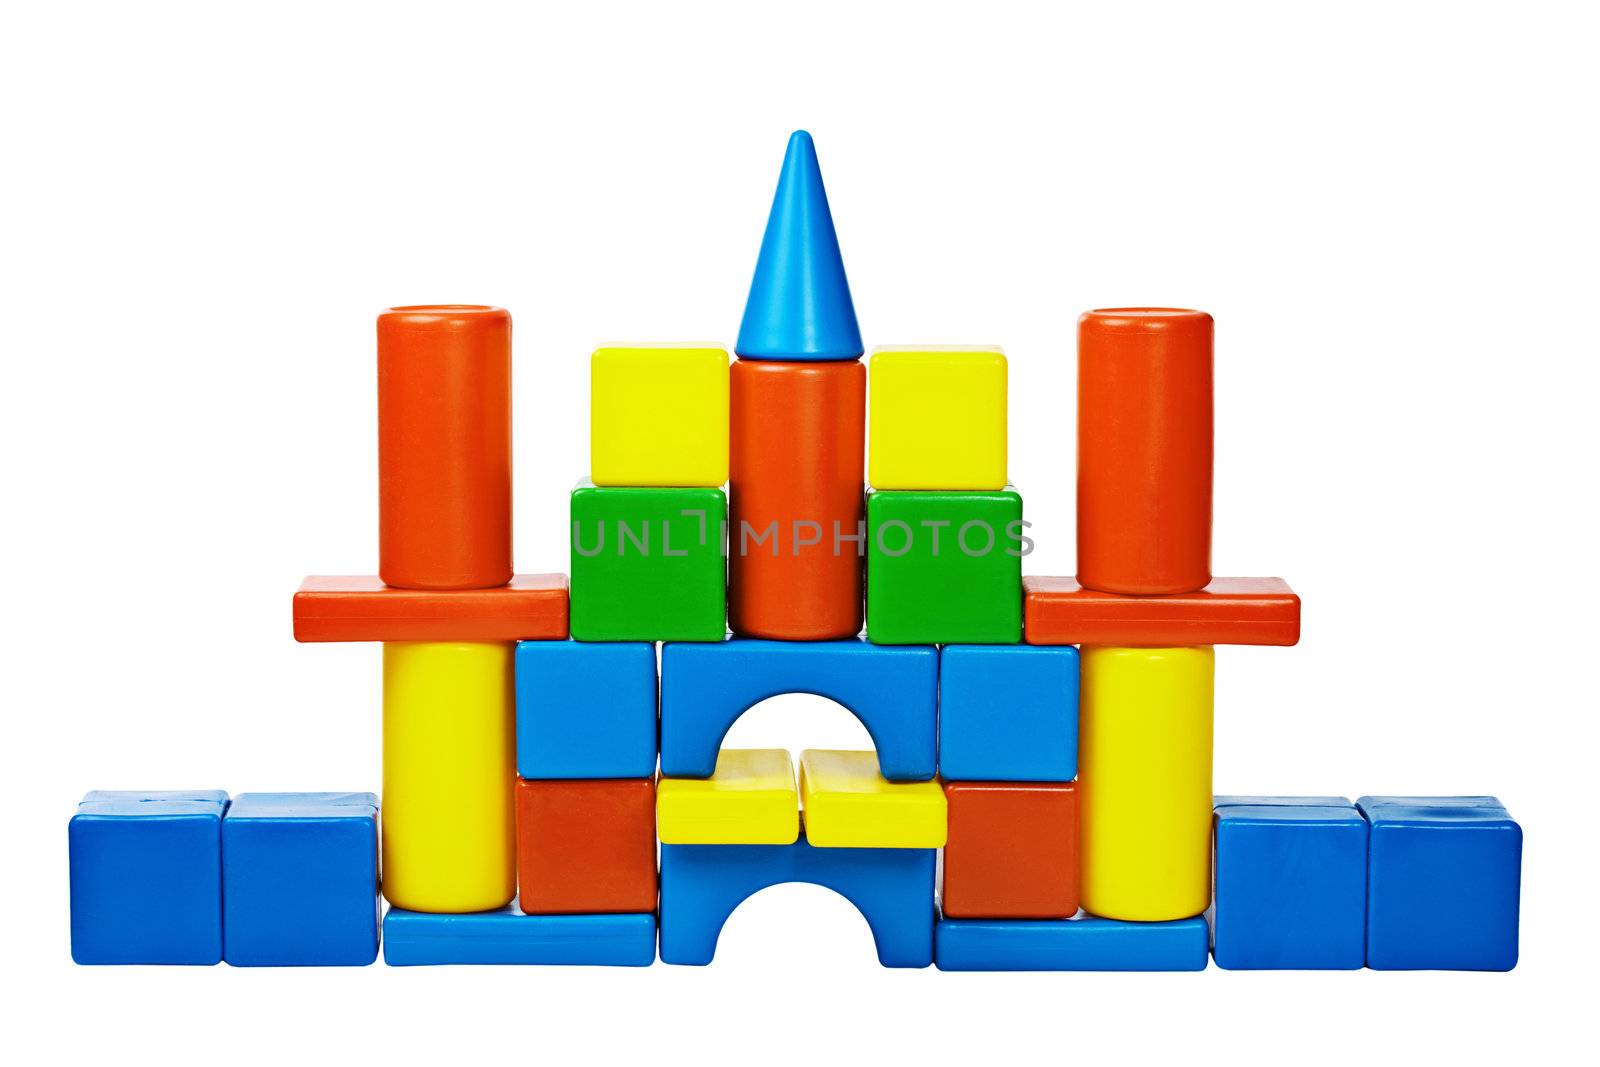 Castle was built from color toy blocks by pzaxe